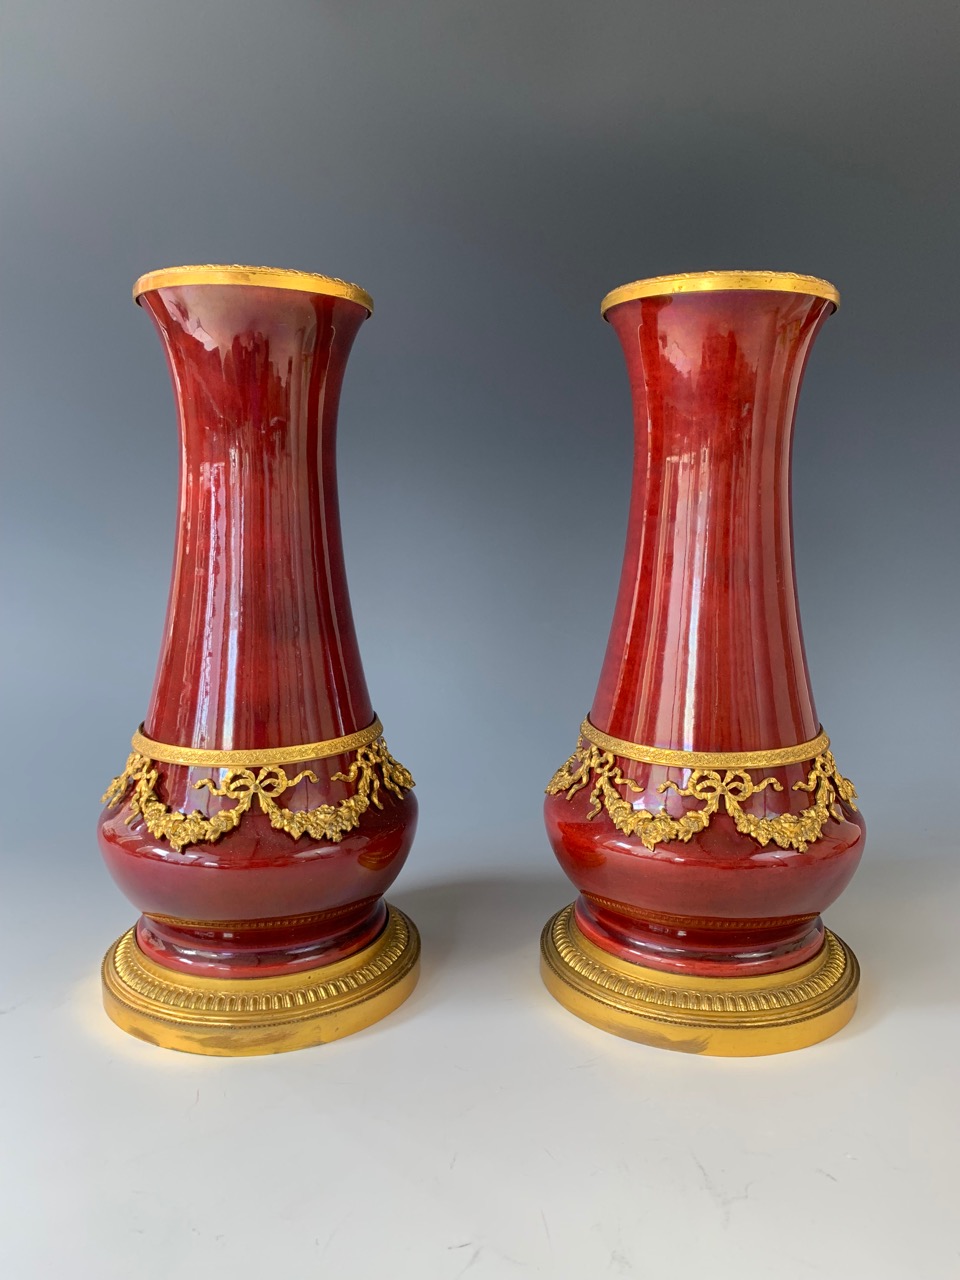 A pair of 19th century Sevres sang de boeuf vases by Paul Milet, of shouldered baluster form, with